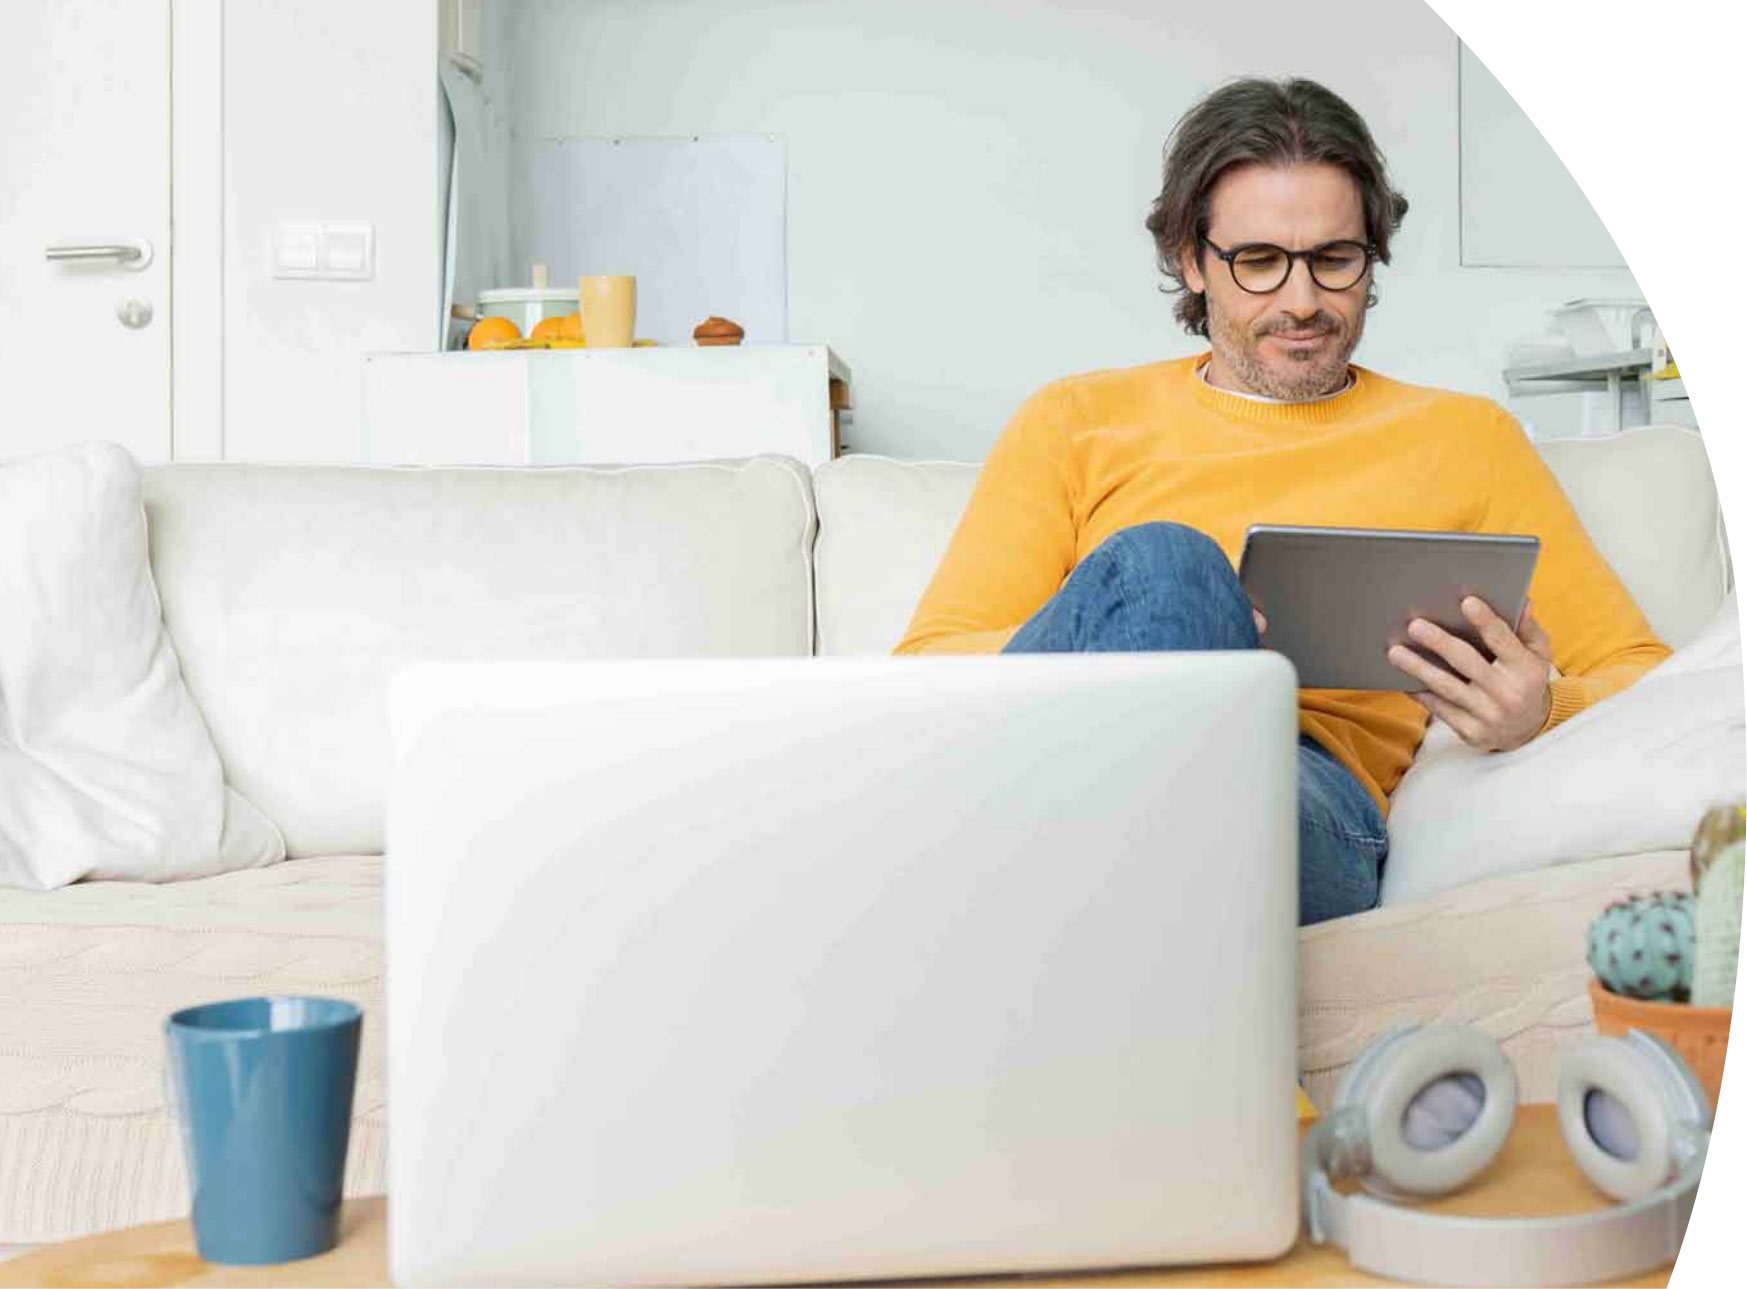 Man sitting on white couch and looking down at a tablet